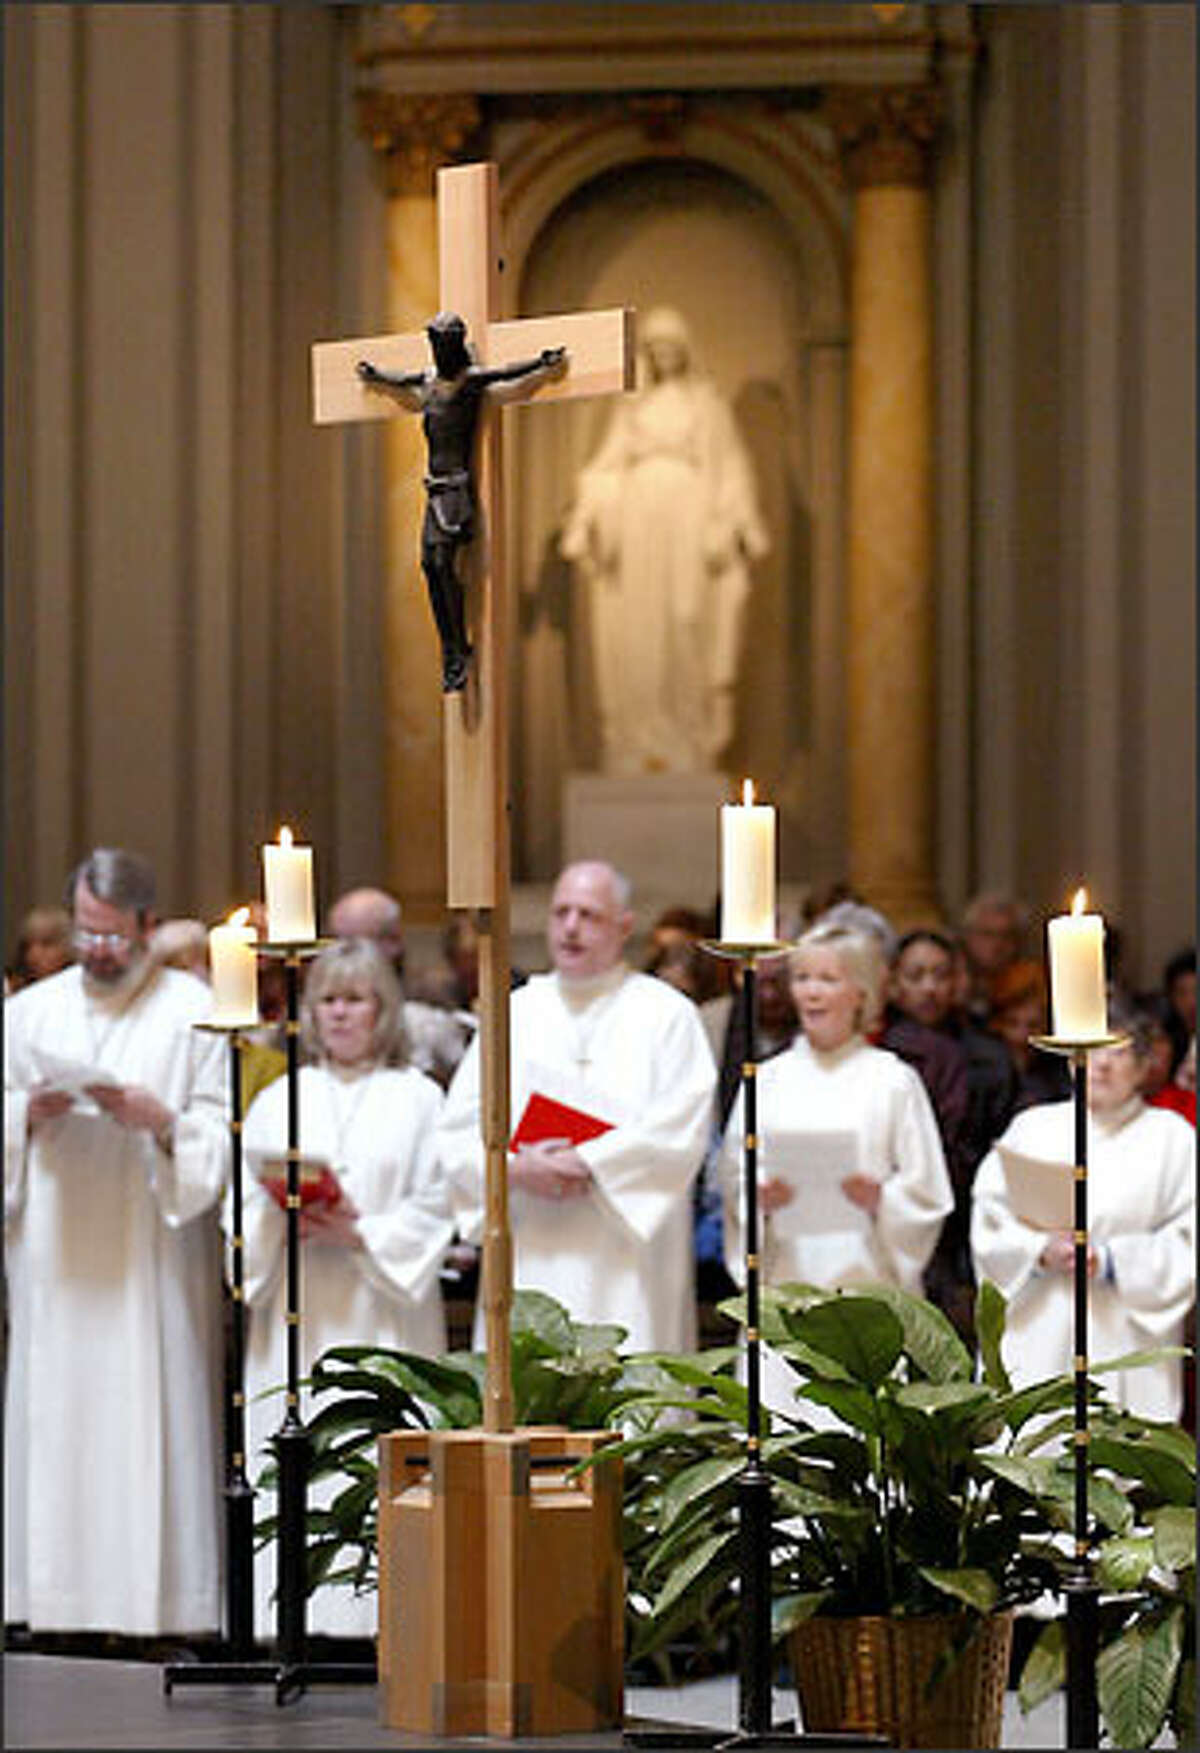 The congregation at St. James Cathedral celebrates the first Sunday Mass of Lent.